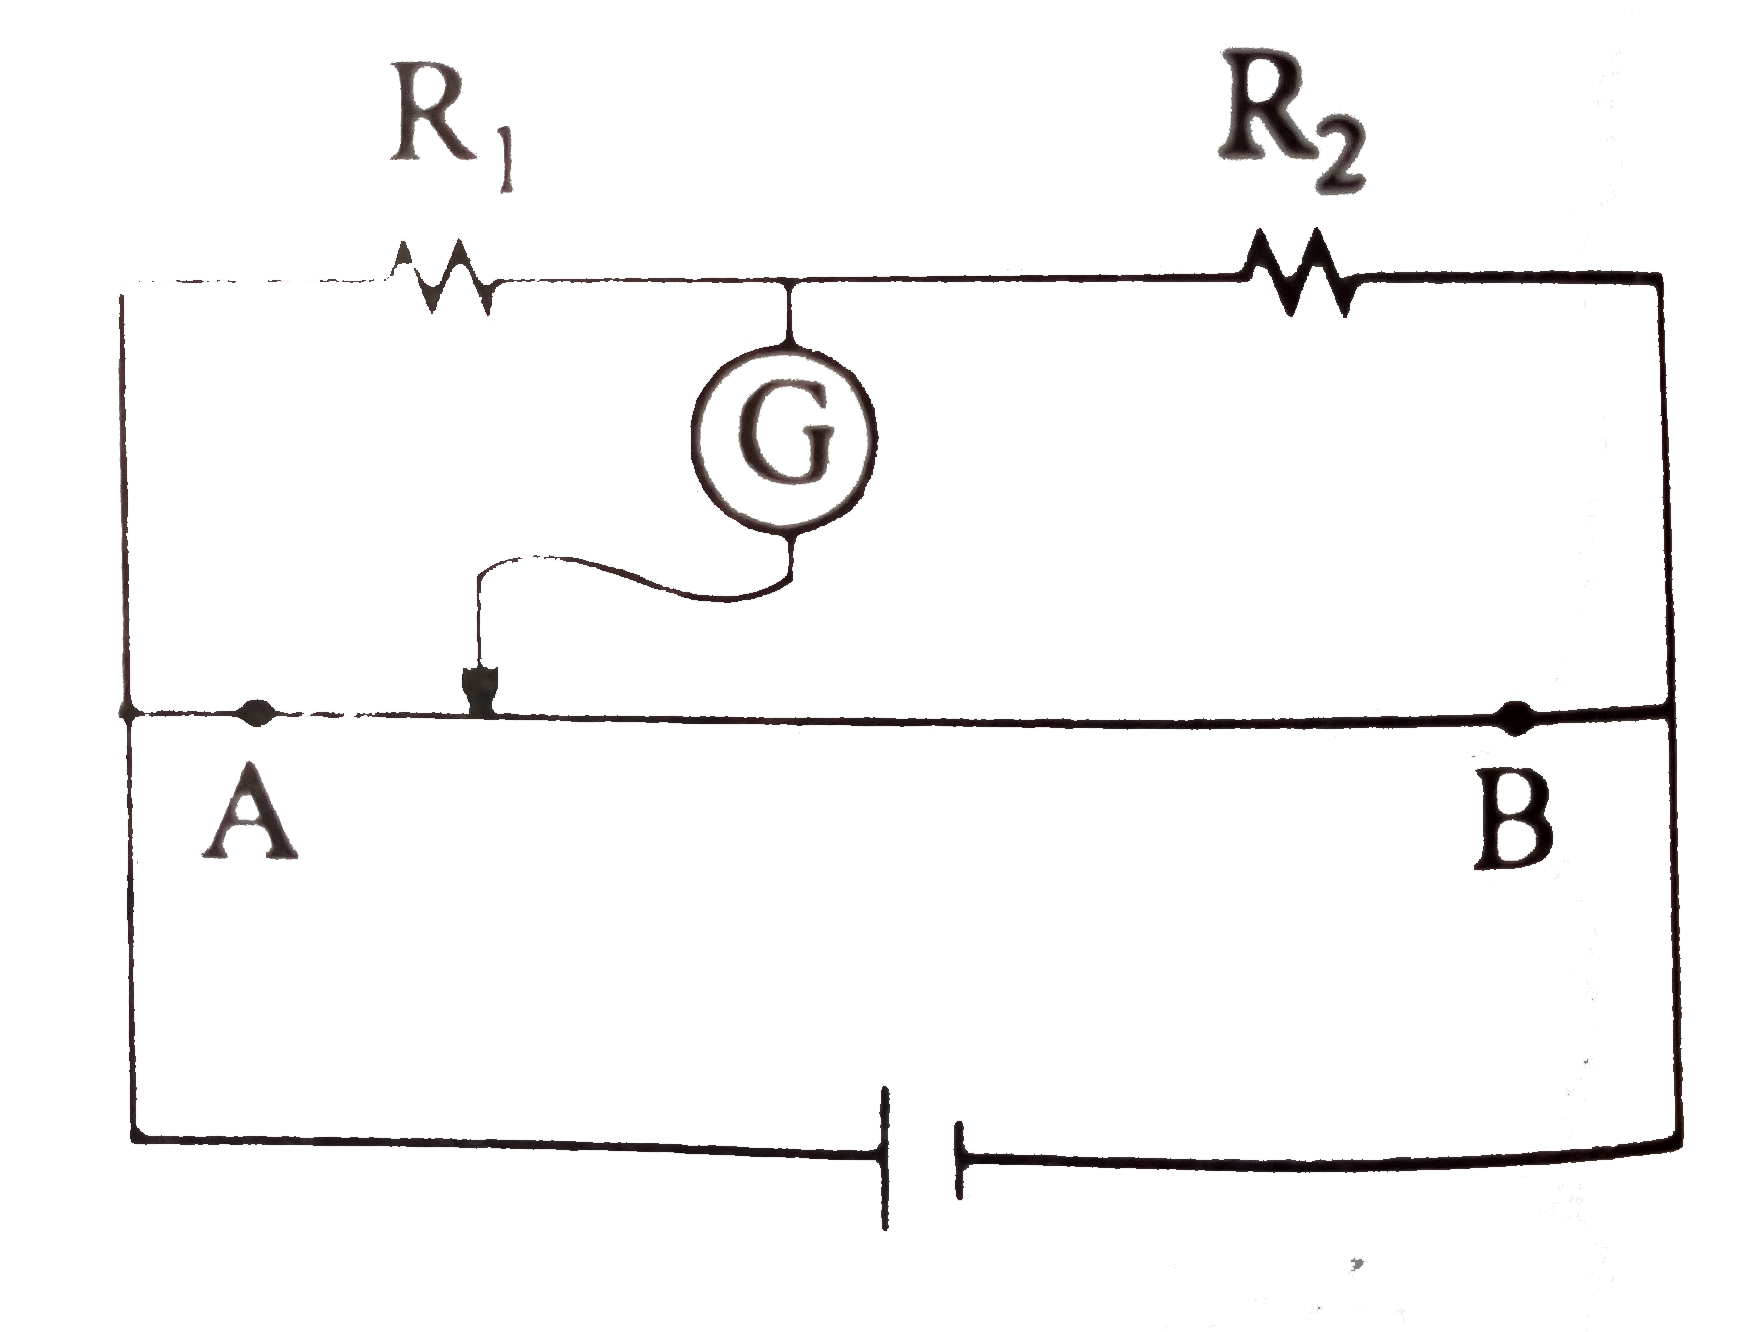 In the figure shown for given values of R1 and R2 the balance point for Jockey is at 40cm from A. When R2 is shunted by a resistance of 10Omega, balance shifts to 50cm. R1 and R2 are (AB=1cm):